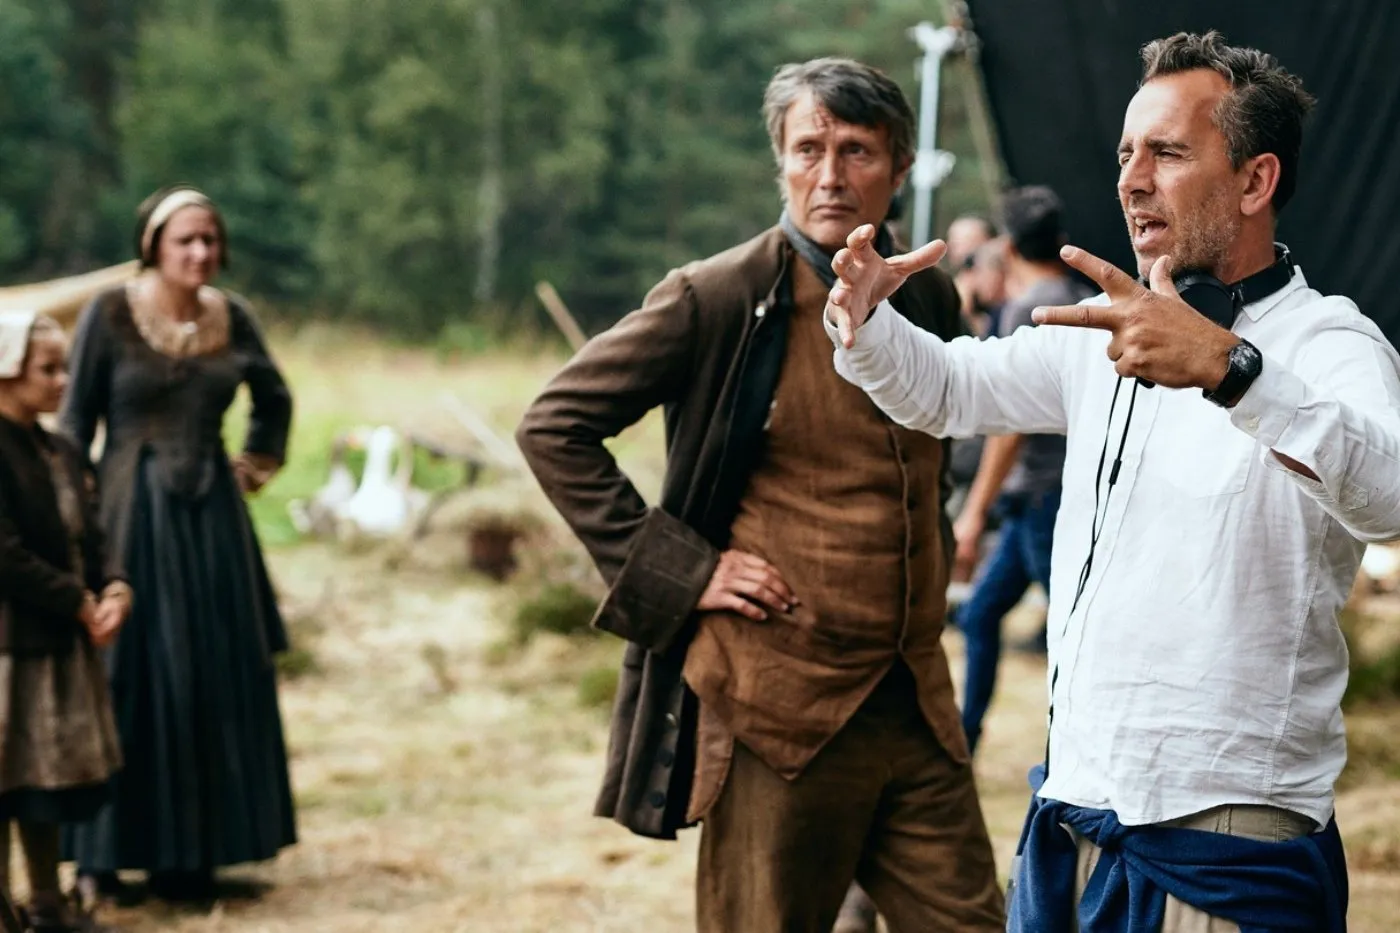 'The Bastard' Starring Mads Mikkelsen Releases Photos From Shooting Site | FMV6